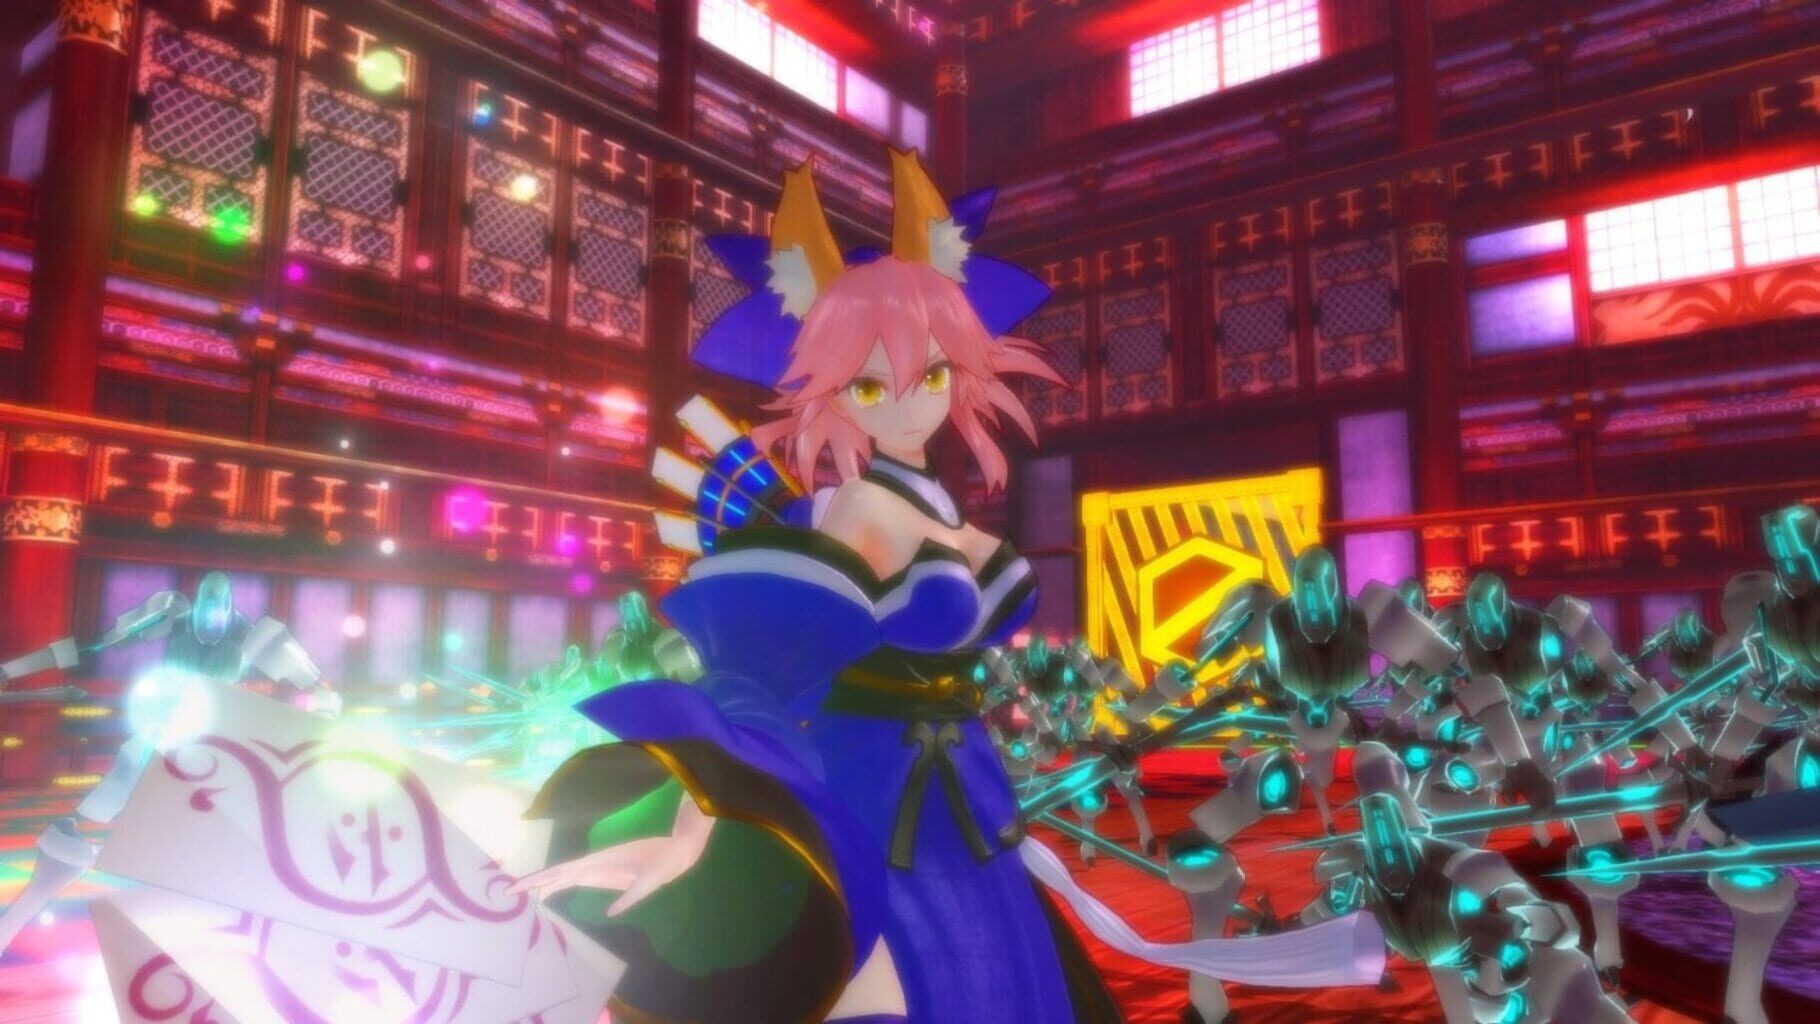 Screenshot for Fate/Extella: The Umbral Star